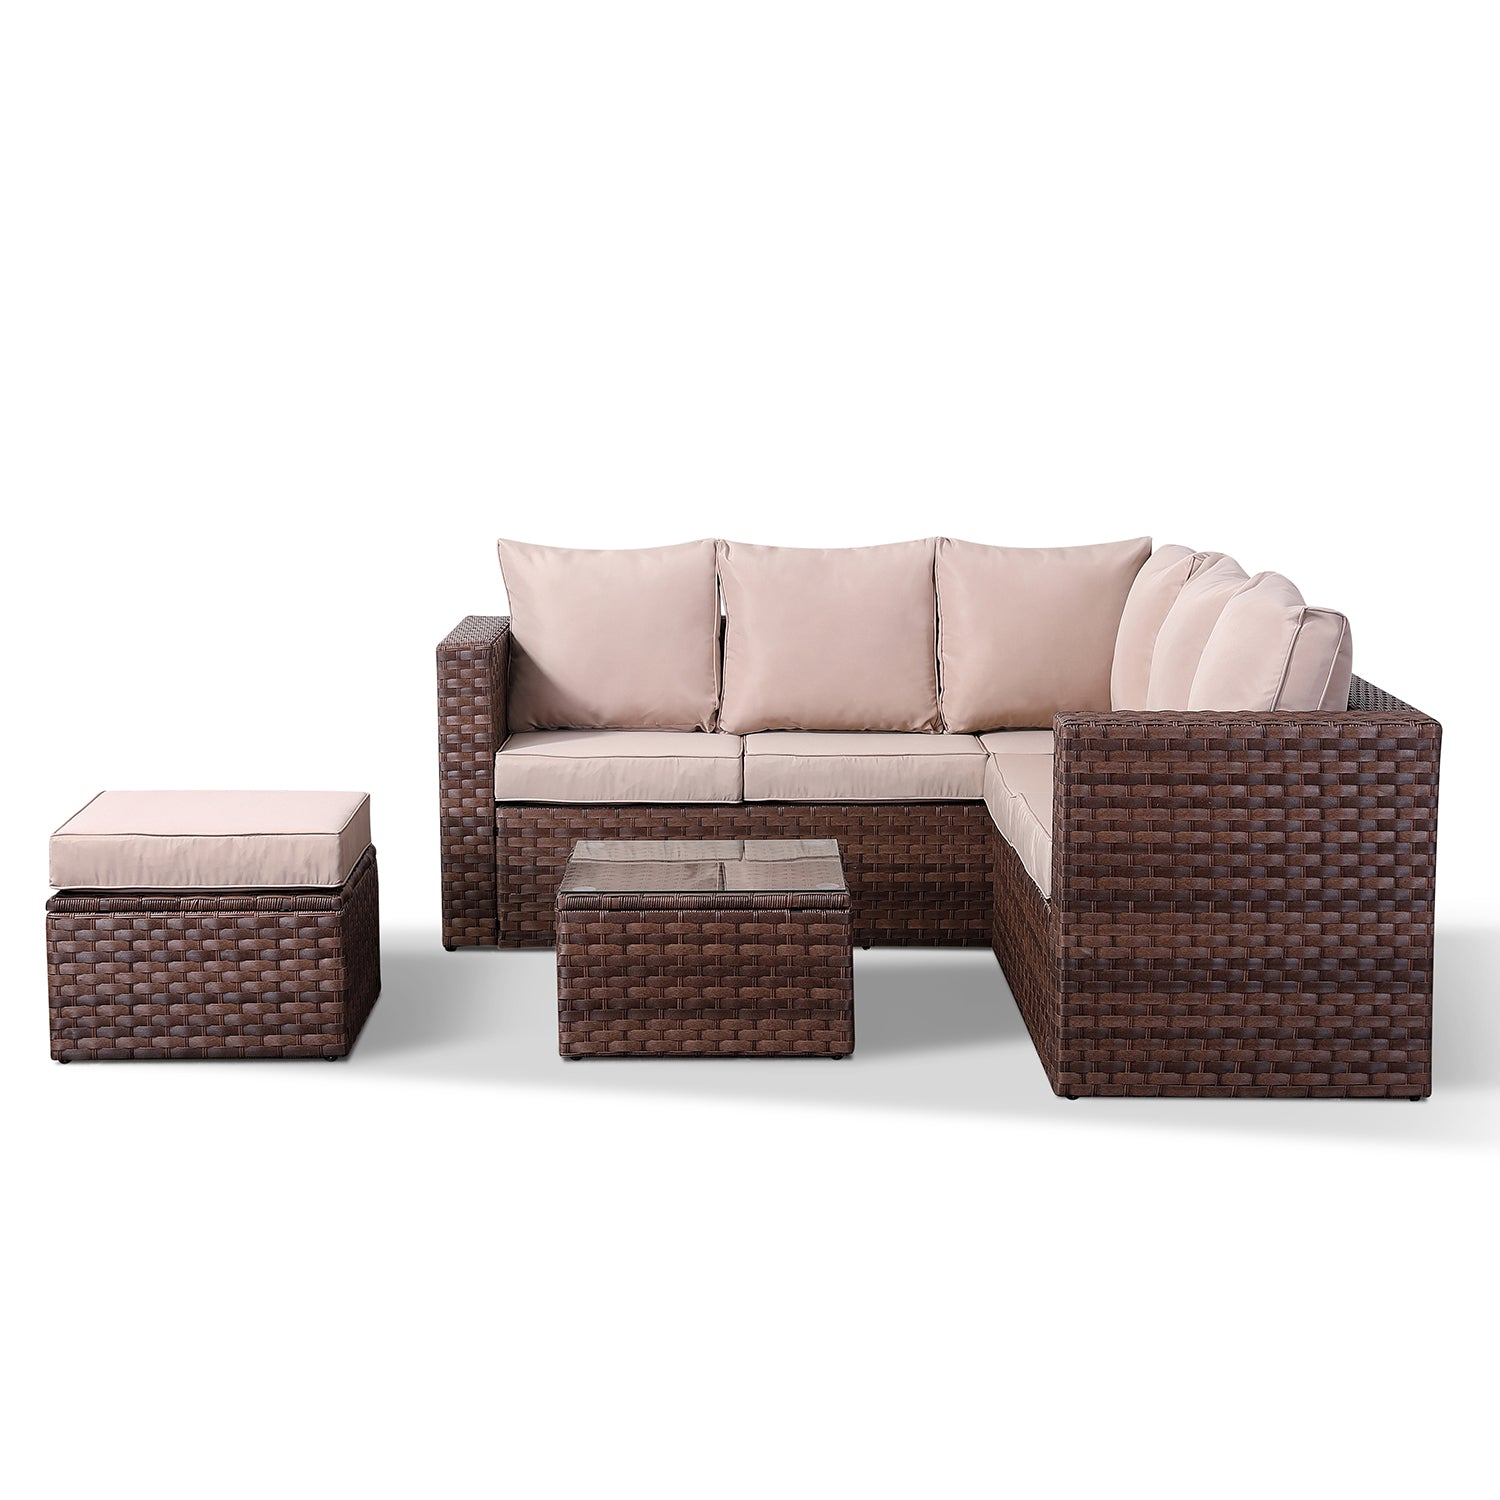 Pansy Range Small Corner Sofa Set With Coffee Table In Large Brown